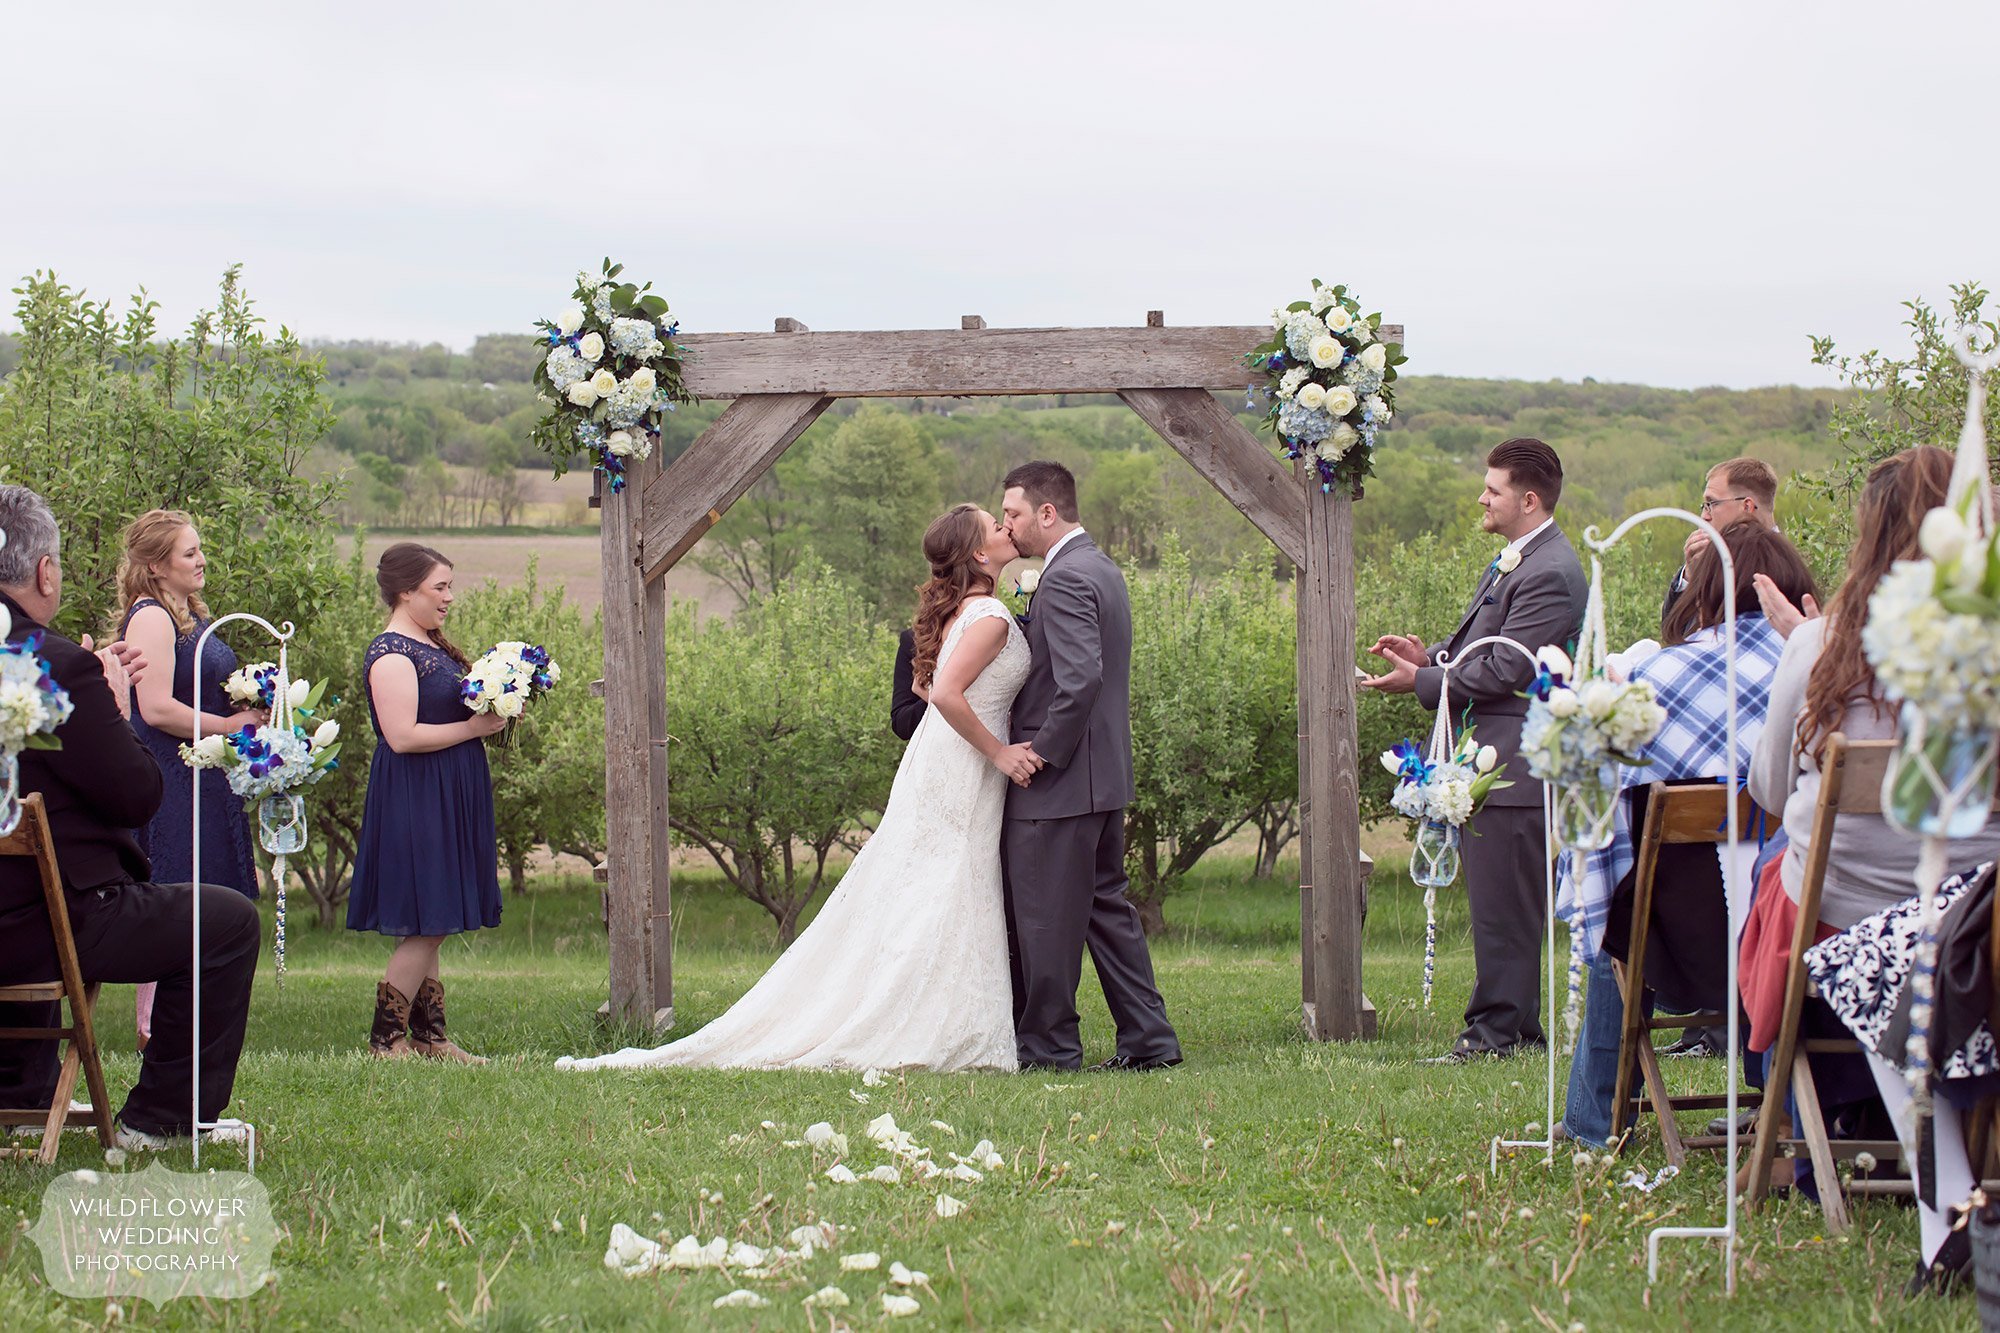 Ceremony kiss at the Weston Red Barn Farm in MO.